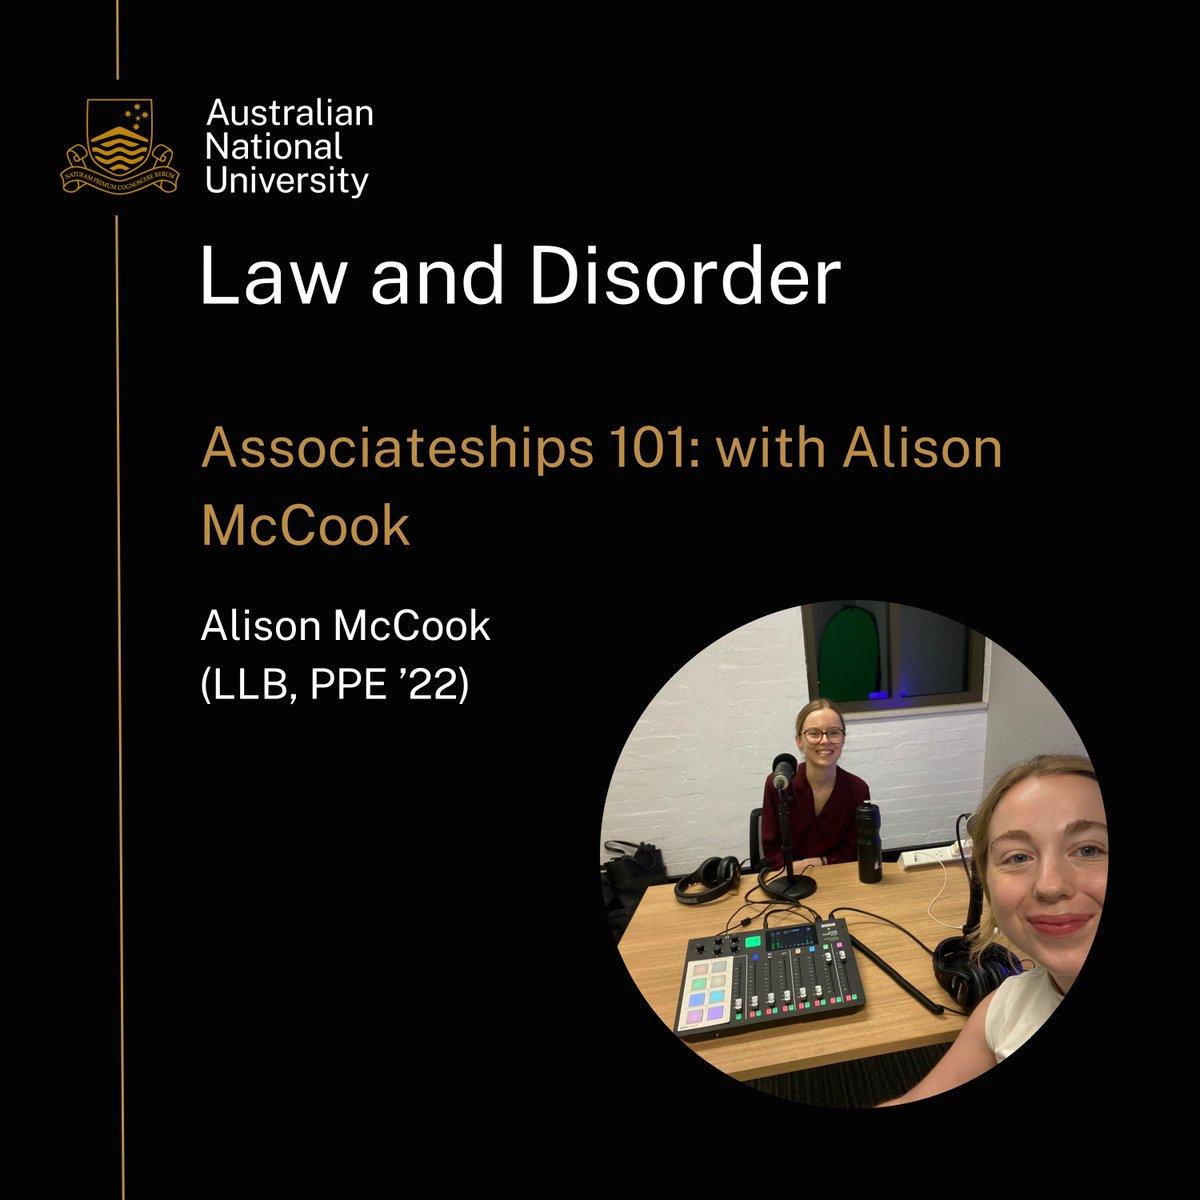 Ever wondered what an Associateship is? Alison McCook (LLB, PPE ’22) joins Audrey Mims this week to unpack what an Associateship is, what her experience as an Associate has been and she shares her advice for the application process. 🎧Listen now: anulaw.info/3vYzBf5